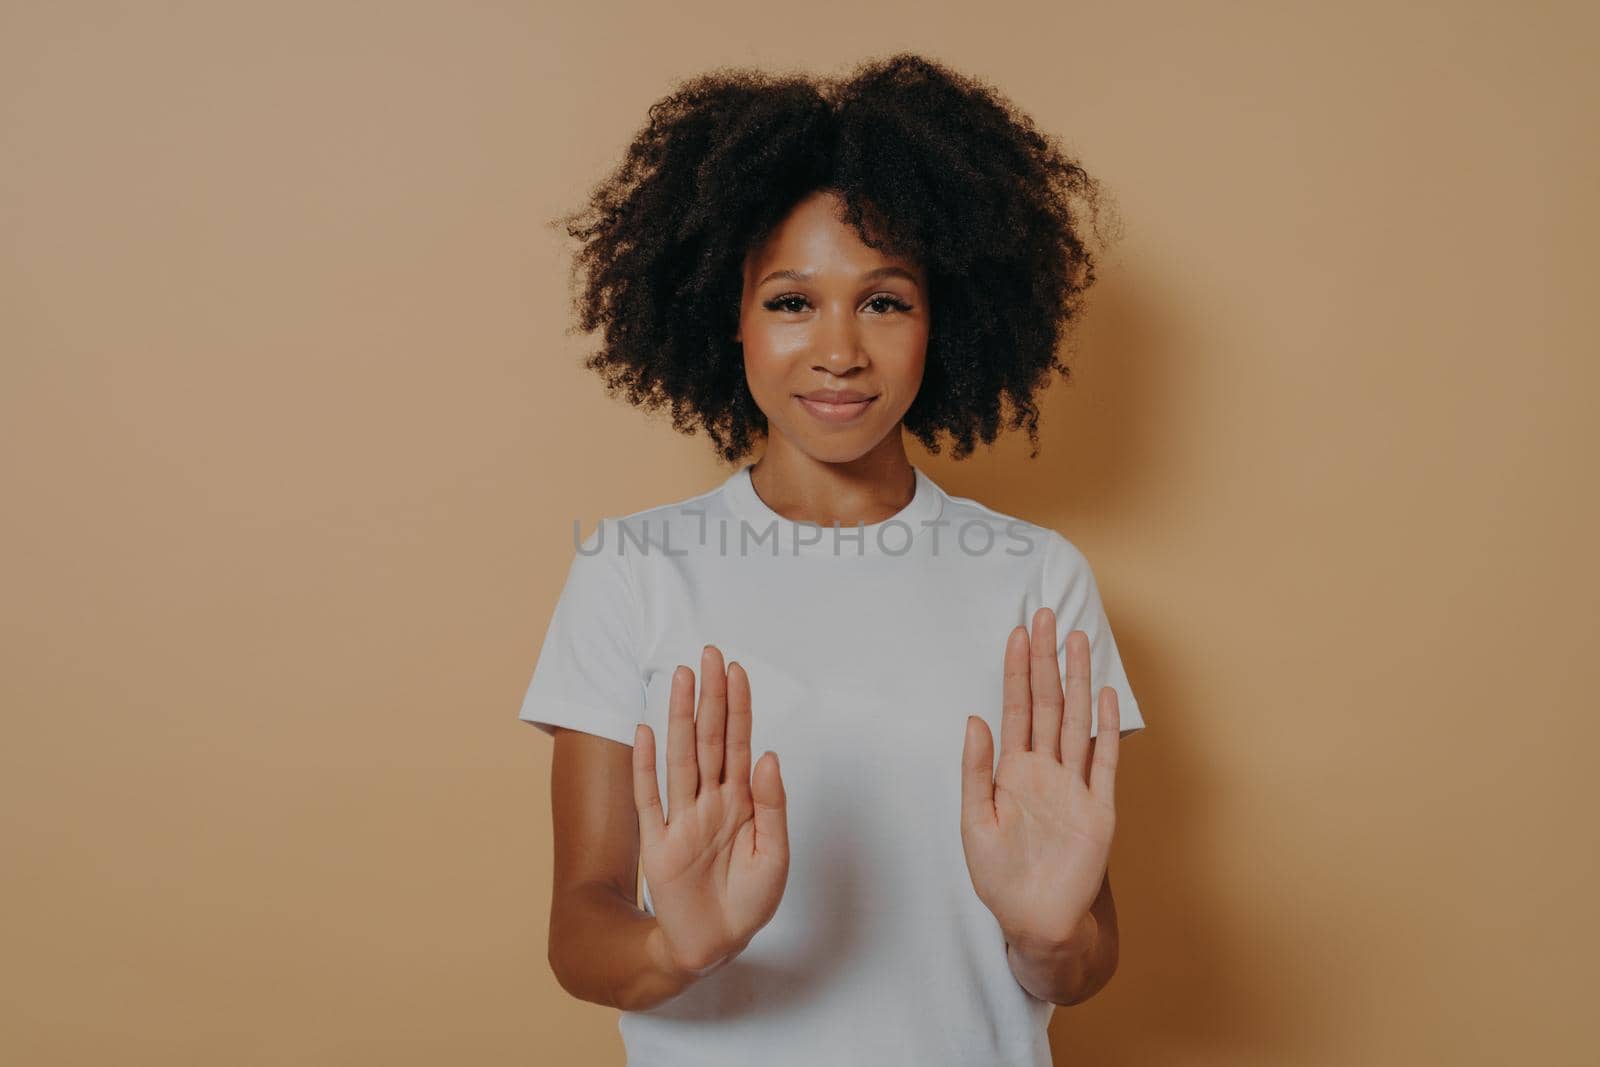 Slow down. Young smiling mixed race woman with curly hairstyle raising palms in stop or prohibition gesture and saying no while standing dressed in white t-shirt over brown studio wall